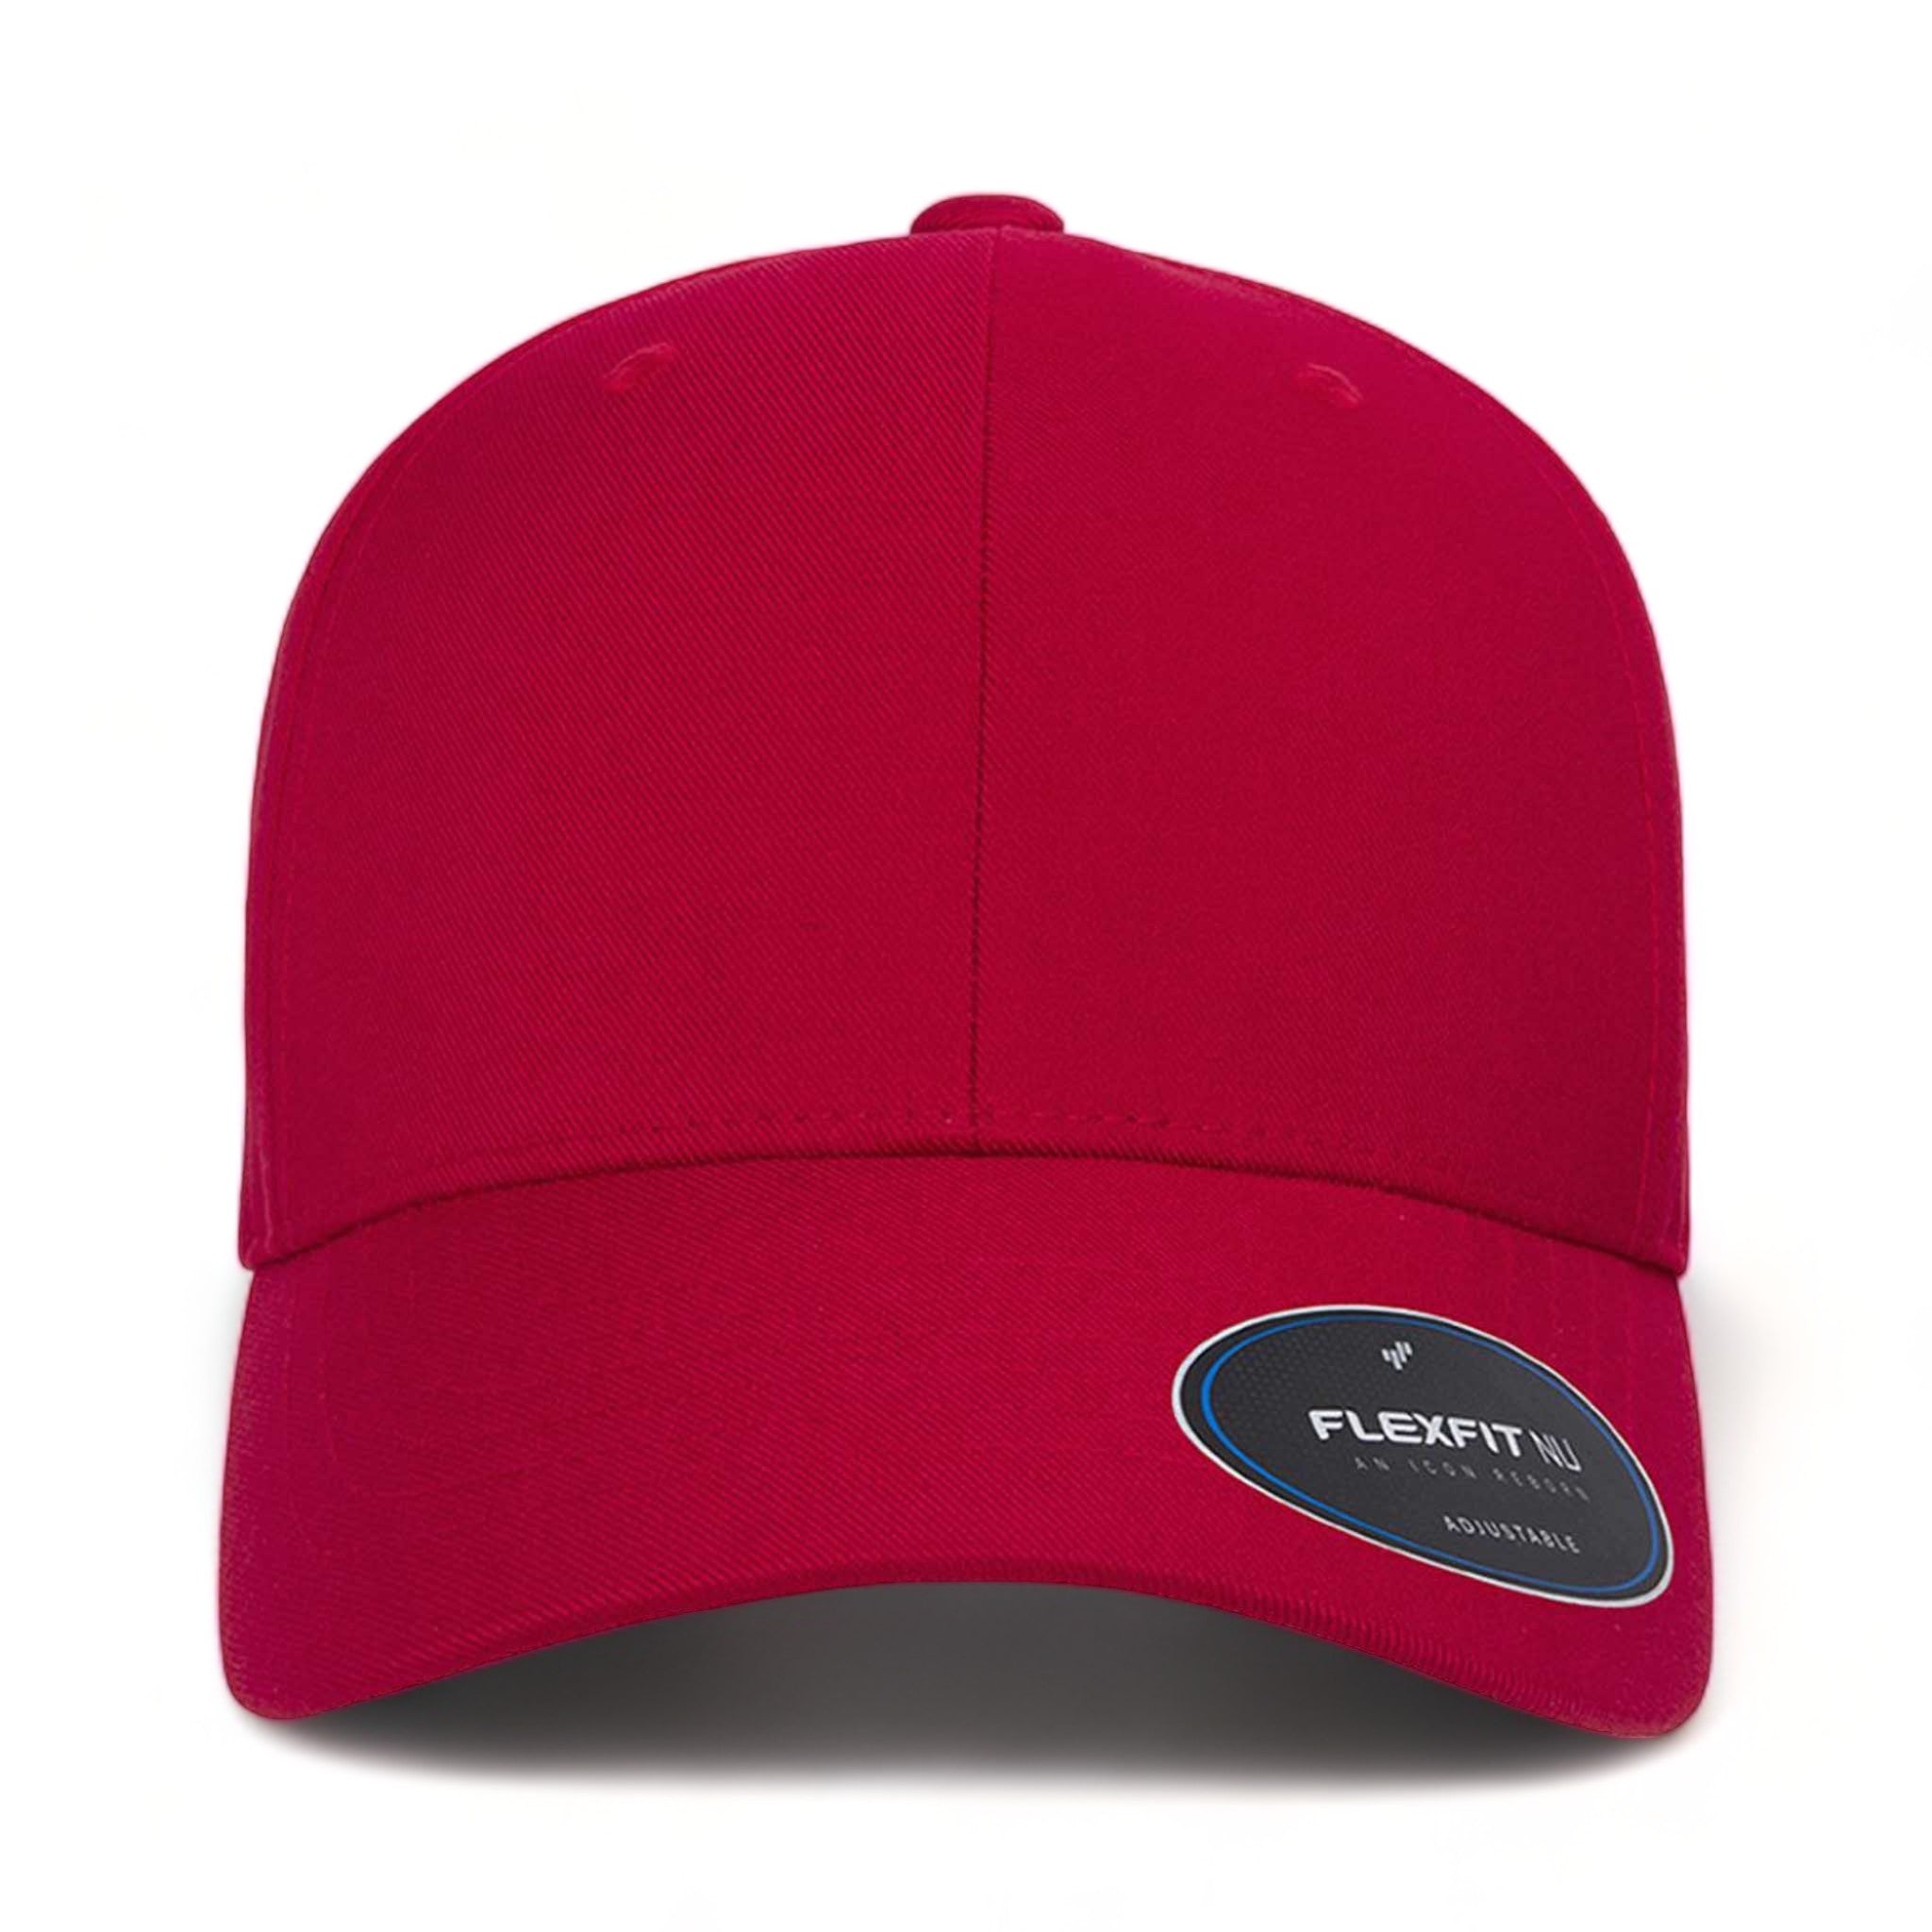 Front view of Flexfit 6110NU custom hat in red